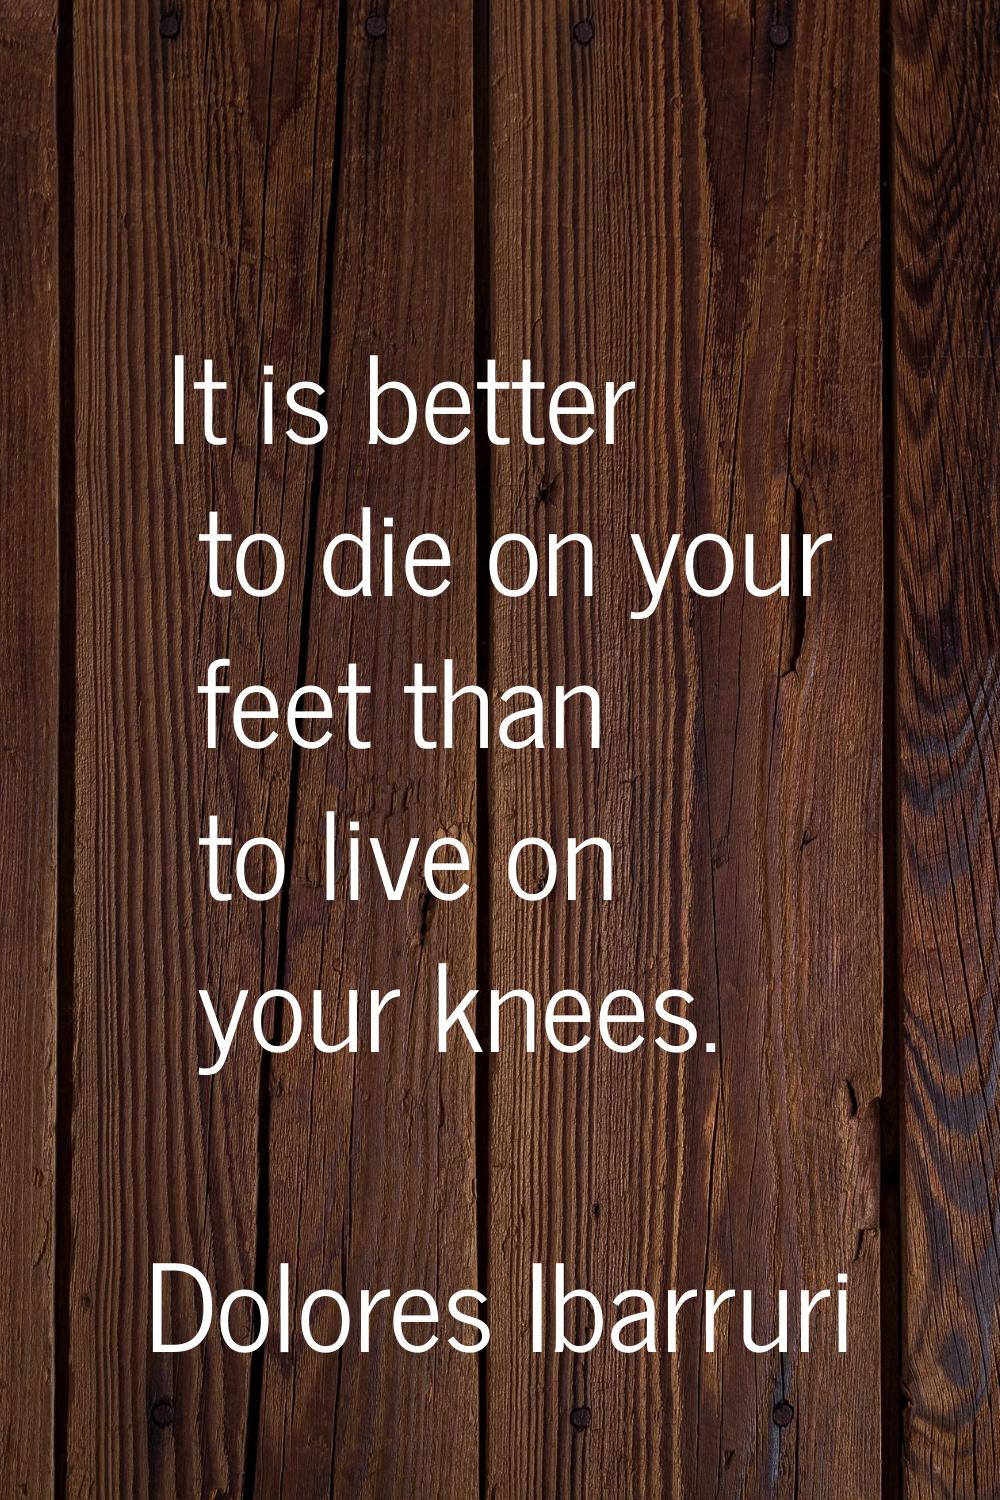 It is better to die on your feet than to live on your knees.